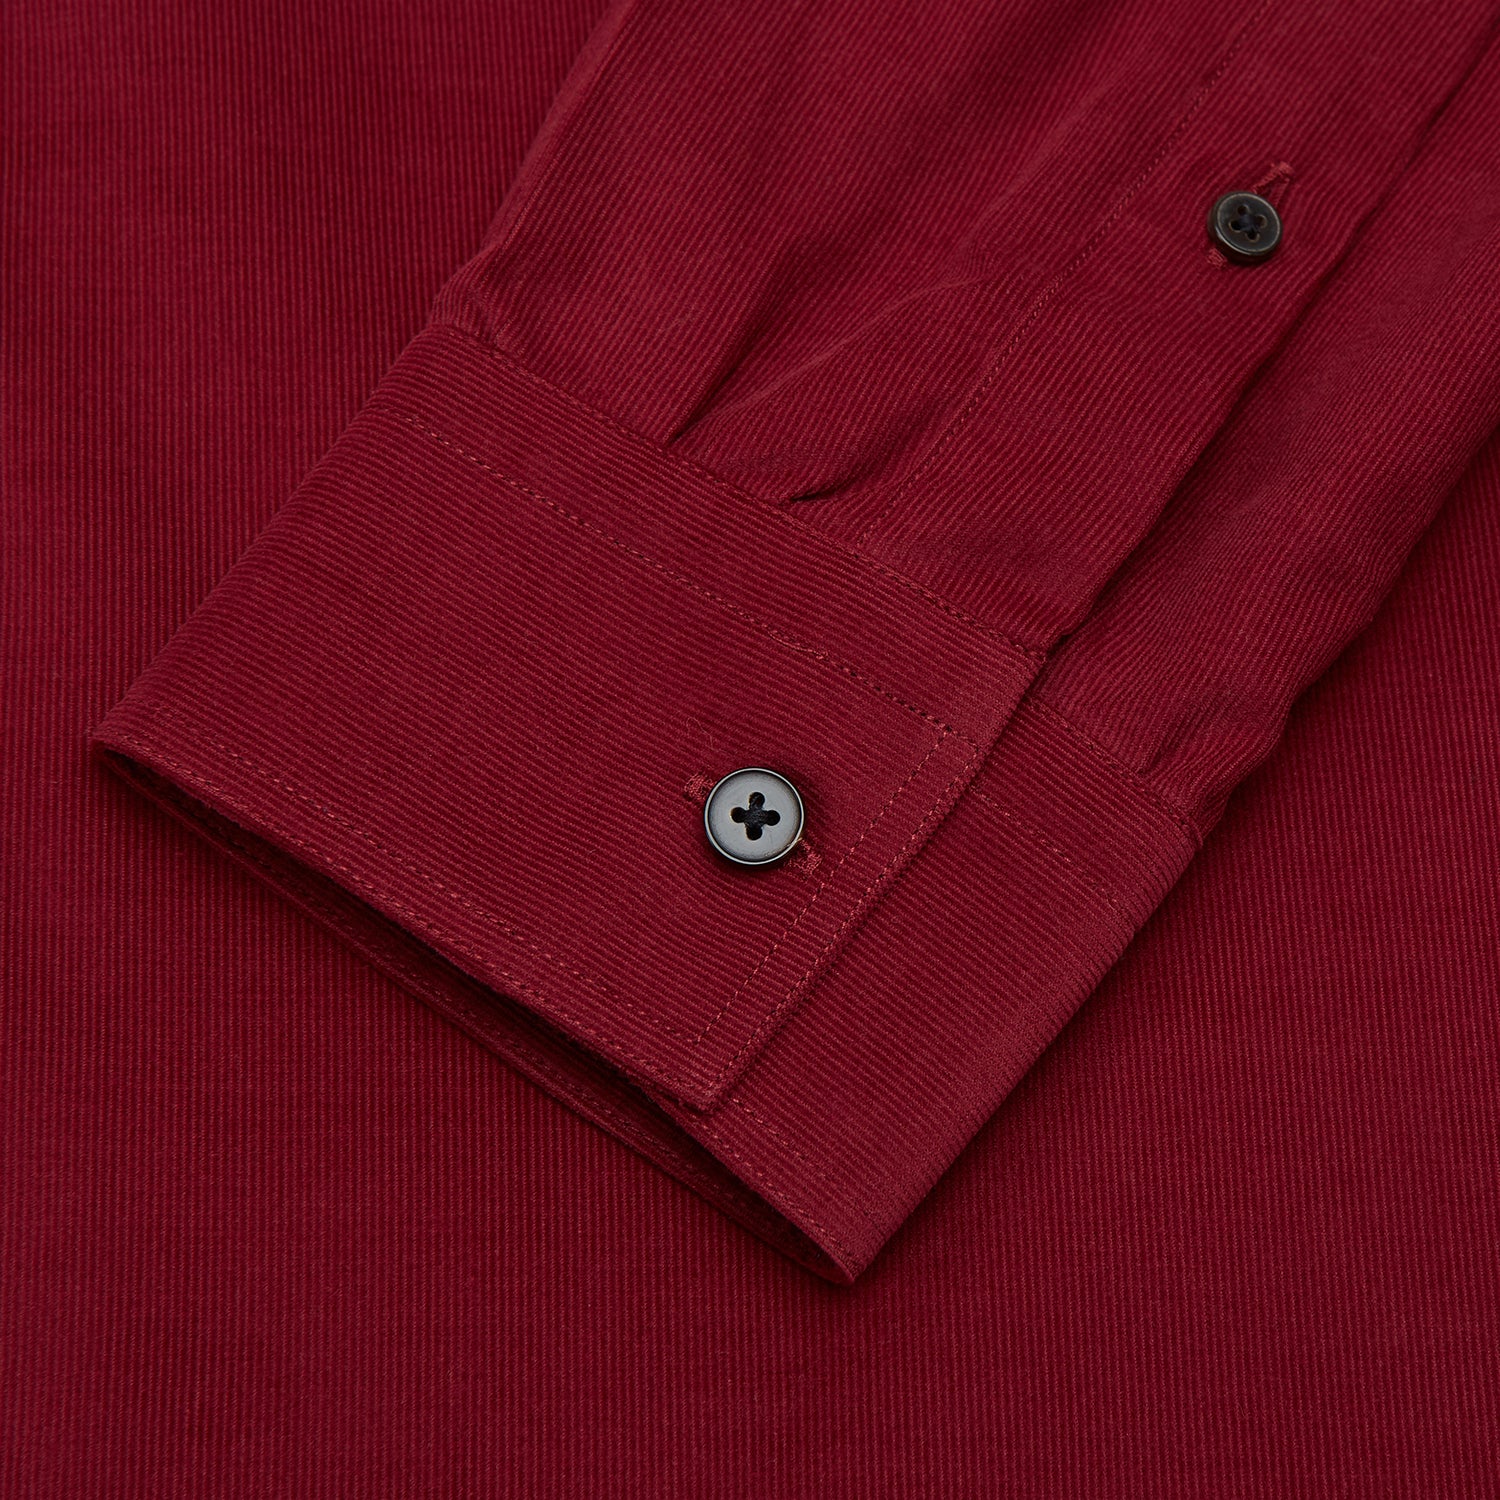 Burgundy Corduroy Officer Weekend Fit Shirt with Dorset Collar and One-Button Cuffs